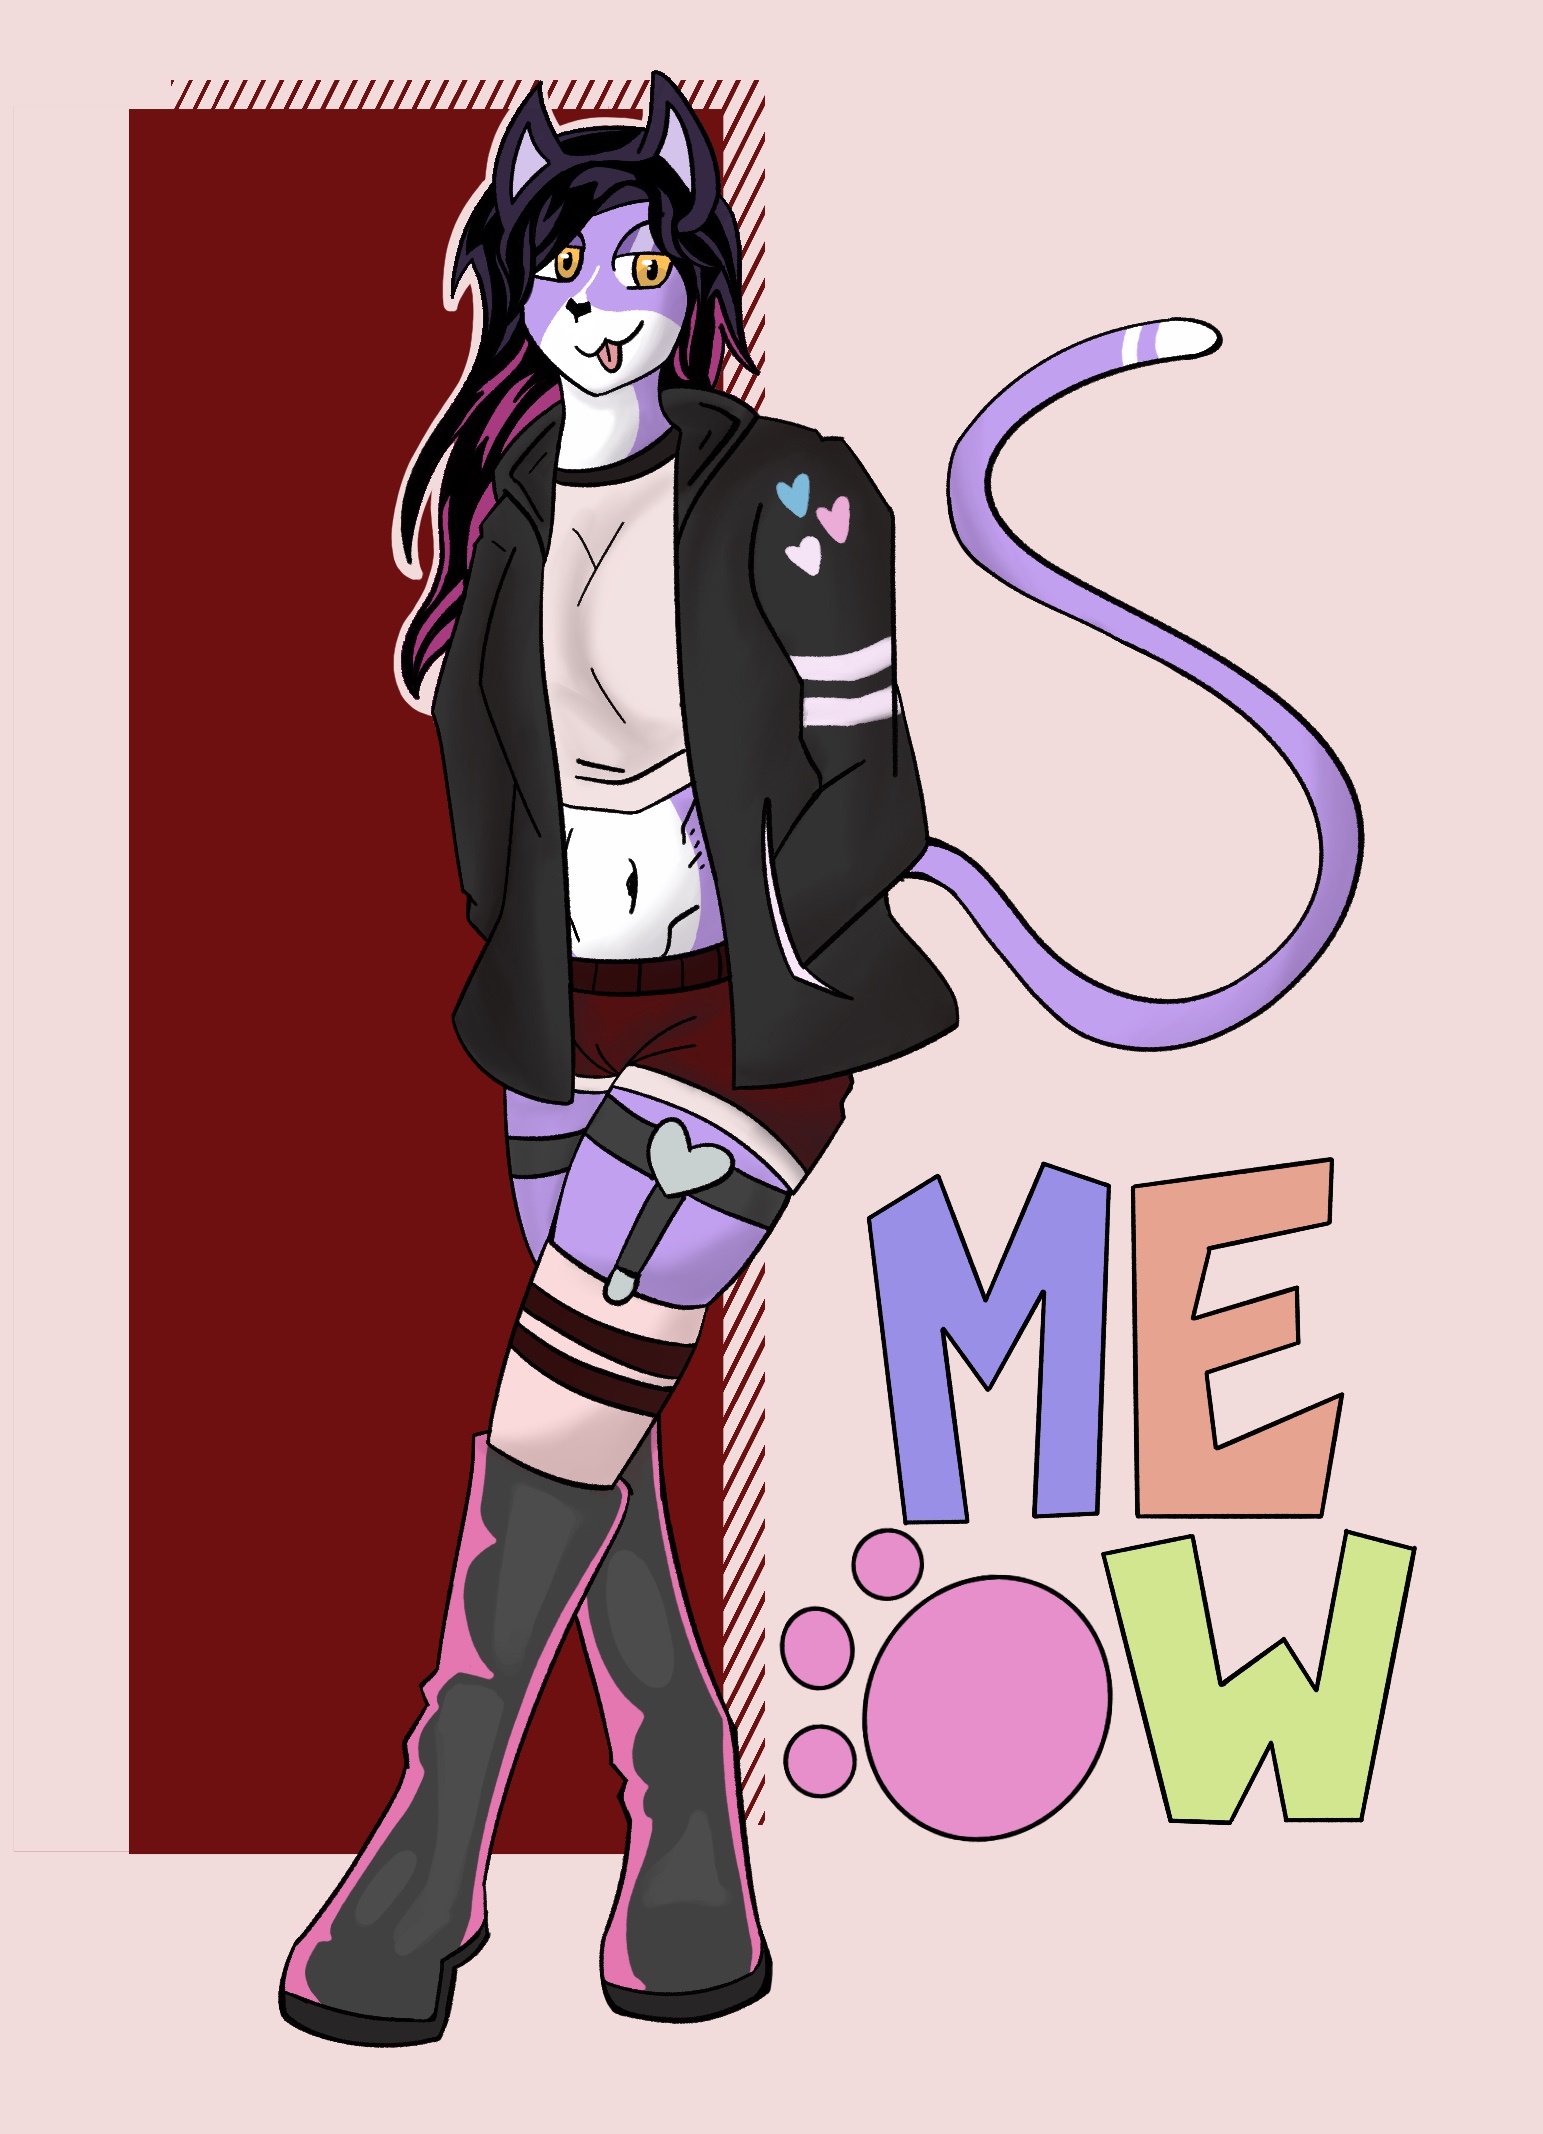 a rendition of my fursona, appearing more catlike than foxlike, notably a long slender cat tail instead of a big poofy fox tail. she has the dark jacket with trans colored patches, long dark hair, red booty shorts, knee length black boots, and garders with a heart on them. there is the word 'meow' in the bottom right corner, with each letter a different color (purple orange pink and green, in order). the O is also a cat paw